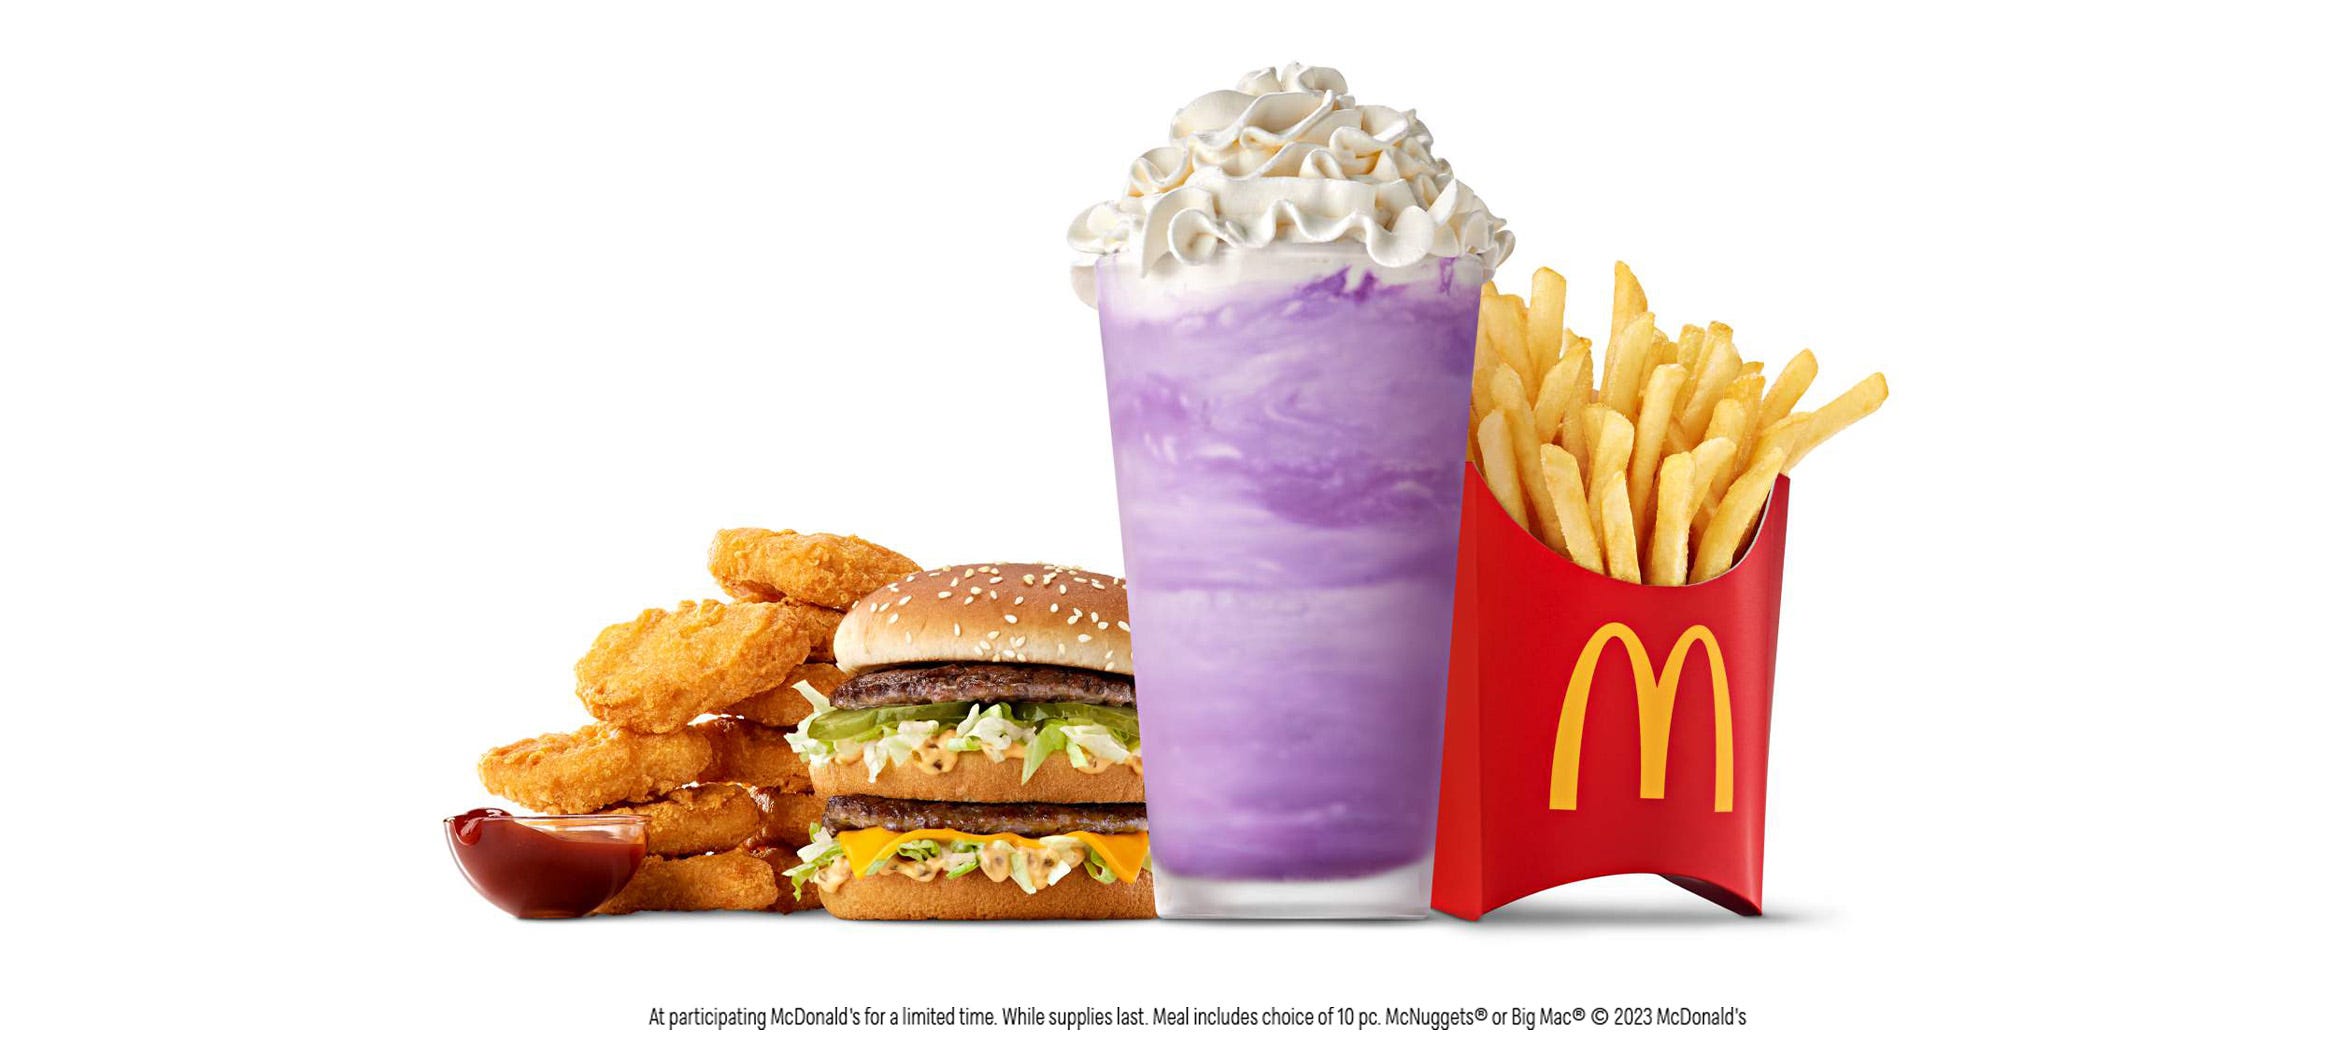 and a new purple berry-flavored shake, is available beginning June 12 at participating restaurants, while supplies last.